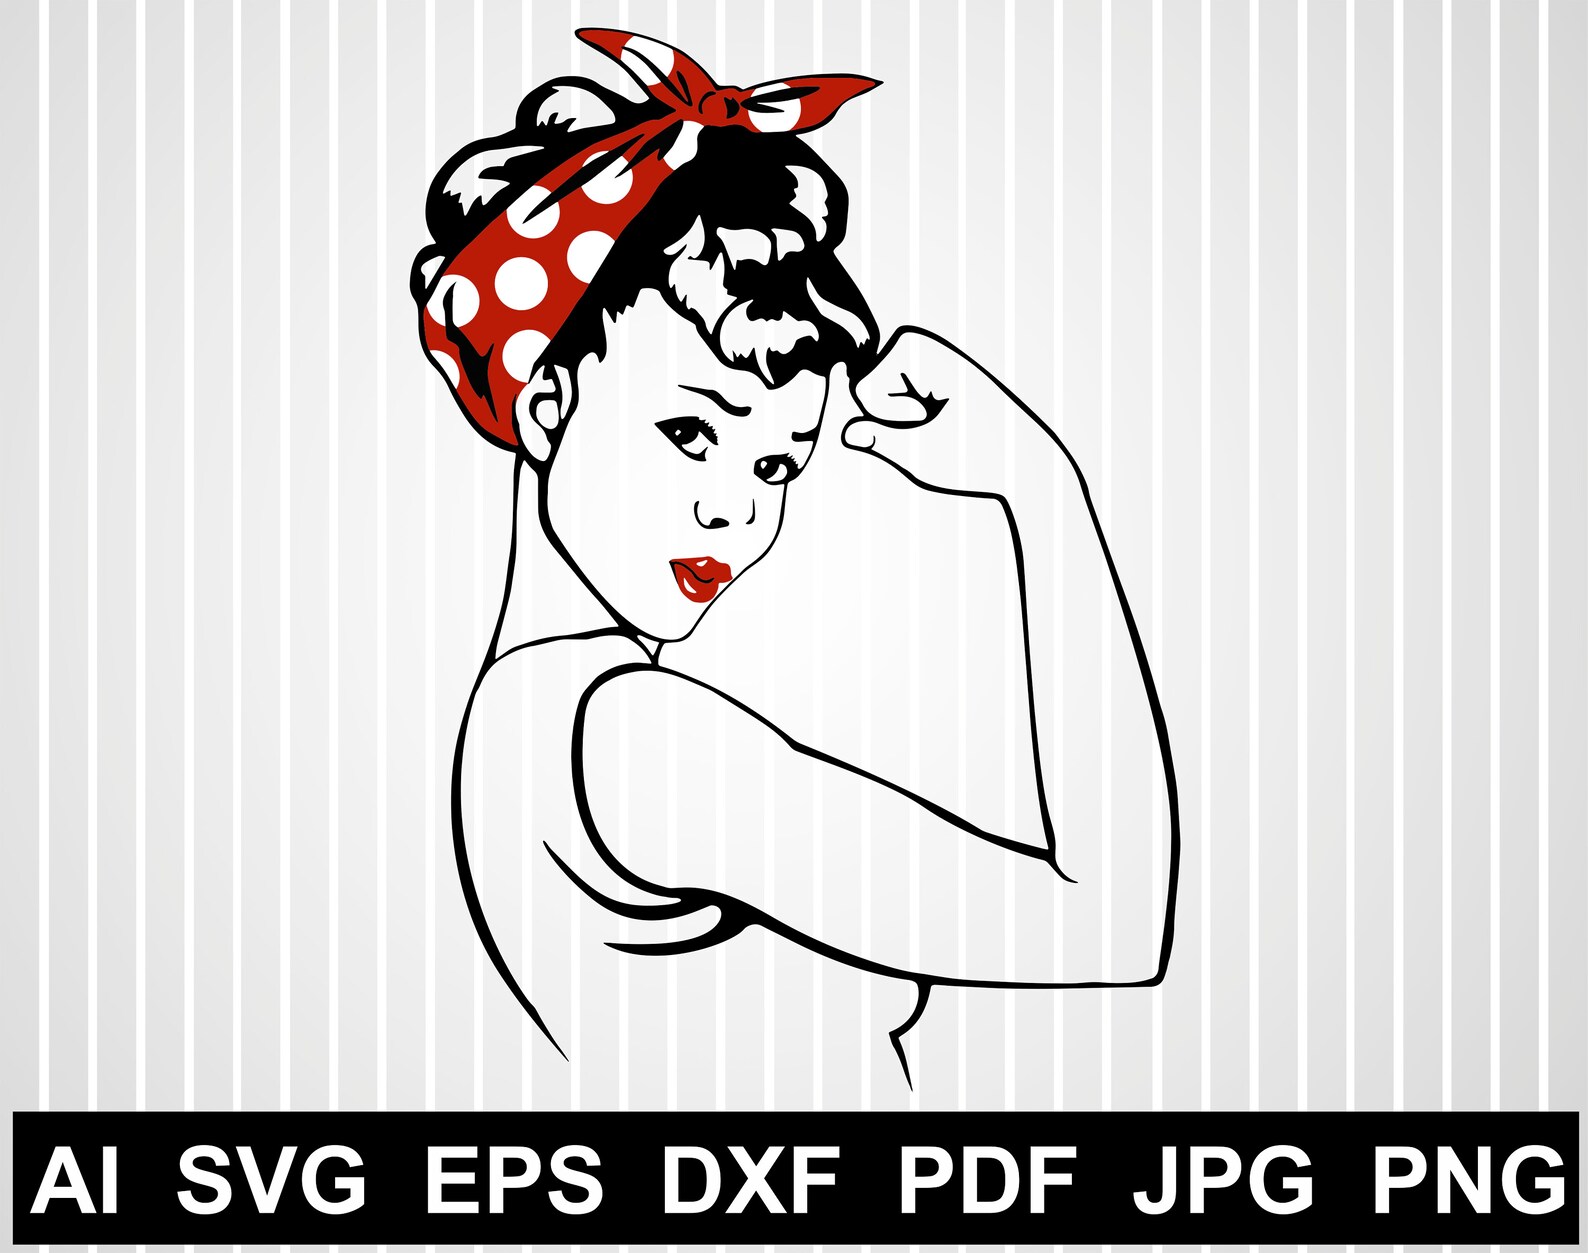 Rosie the riveter svg cuts file for cricut Strong woman Png image 1.